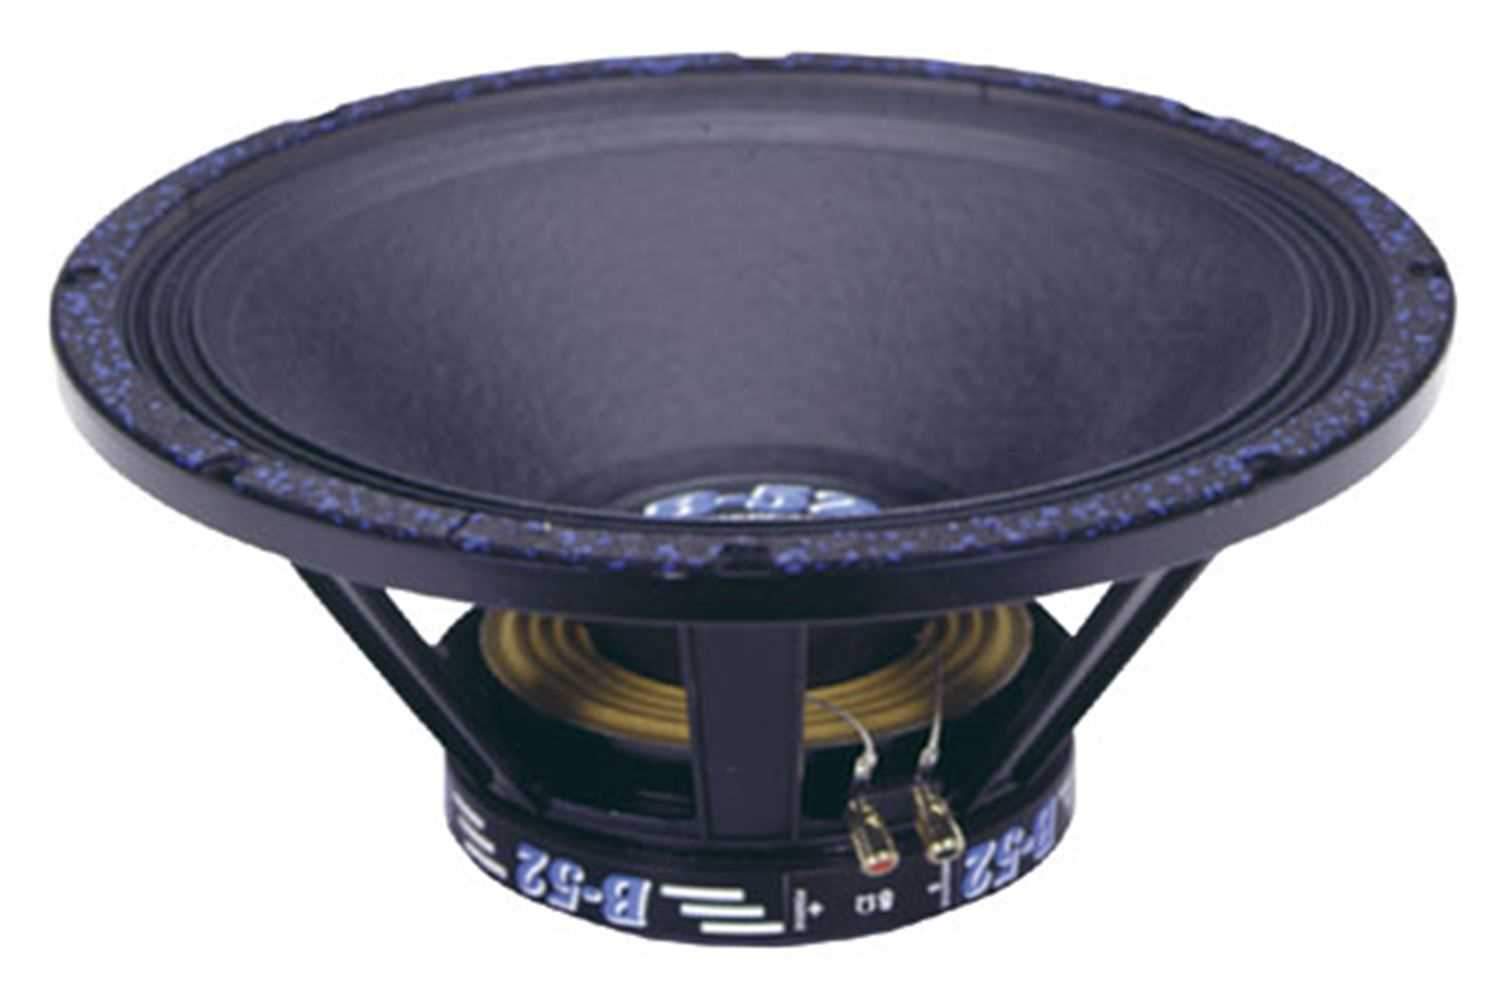 18 inch raw subwoofer